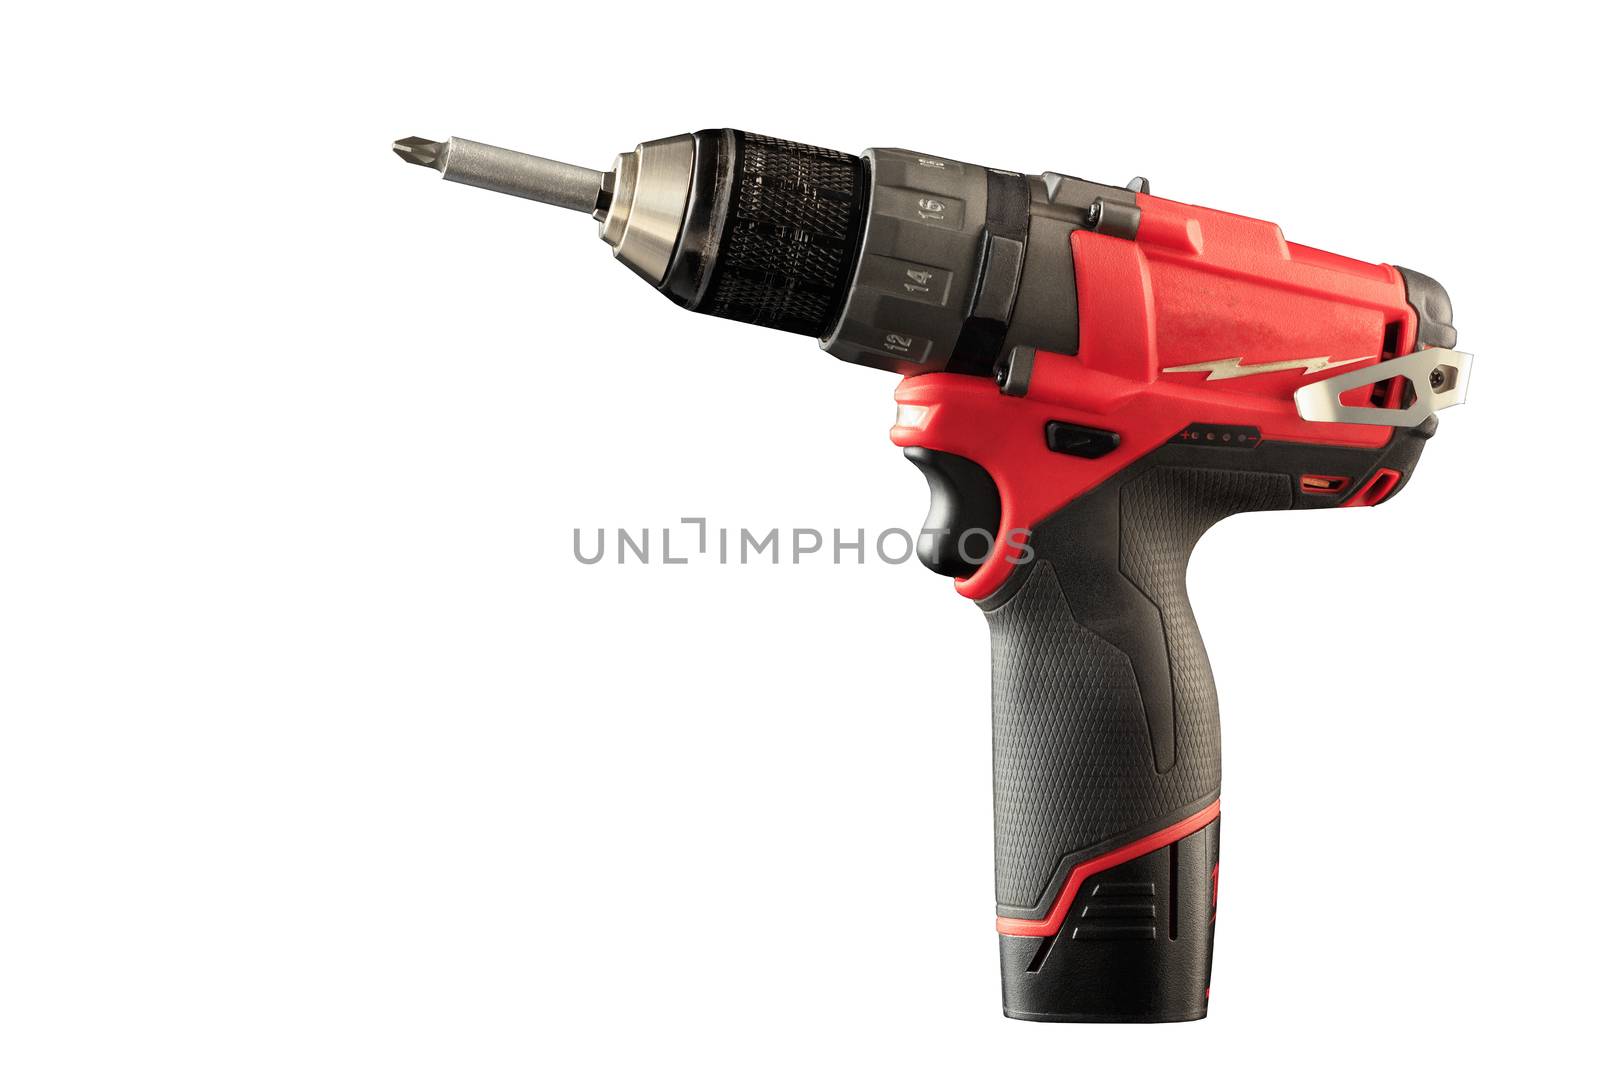 Cordless drill driver in red with rubberized handle in profile, isolated on white background